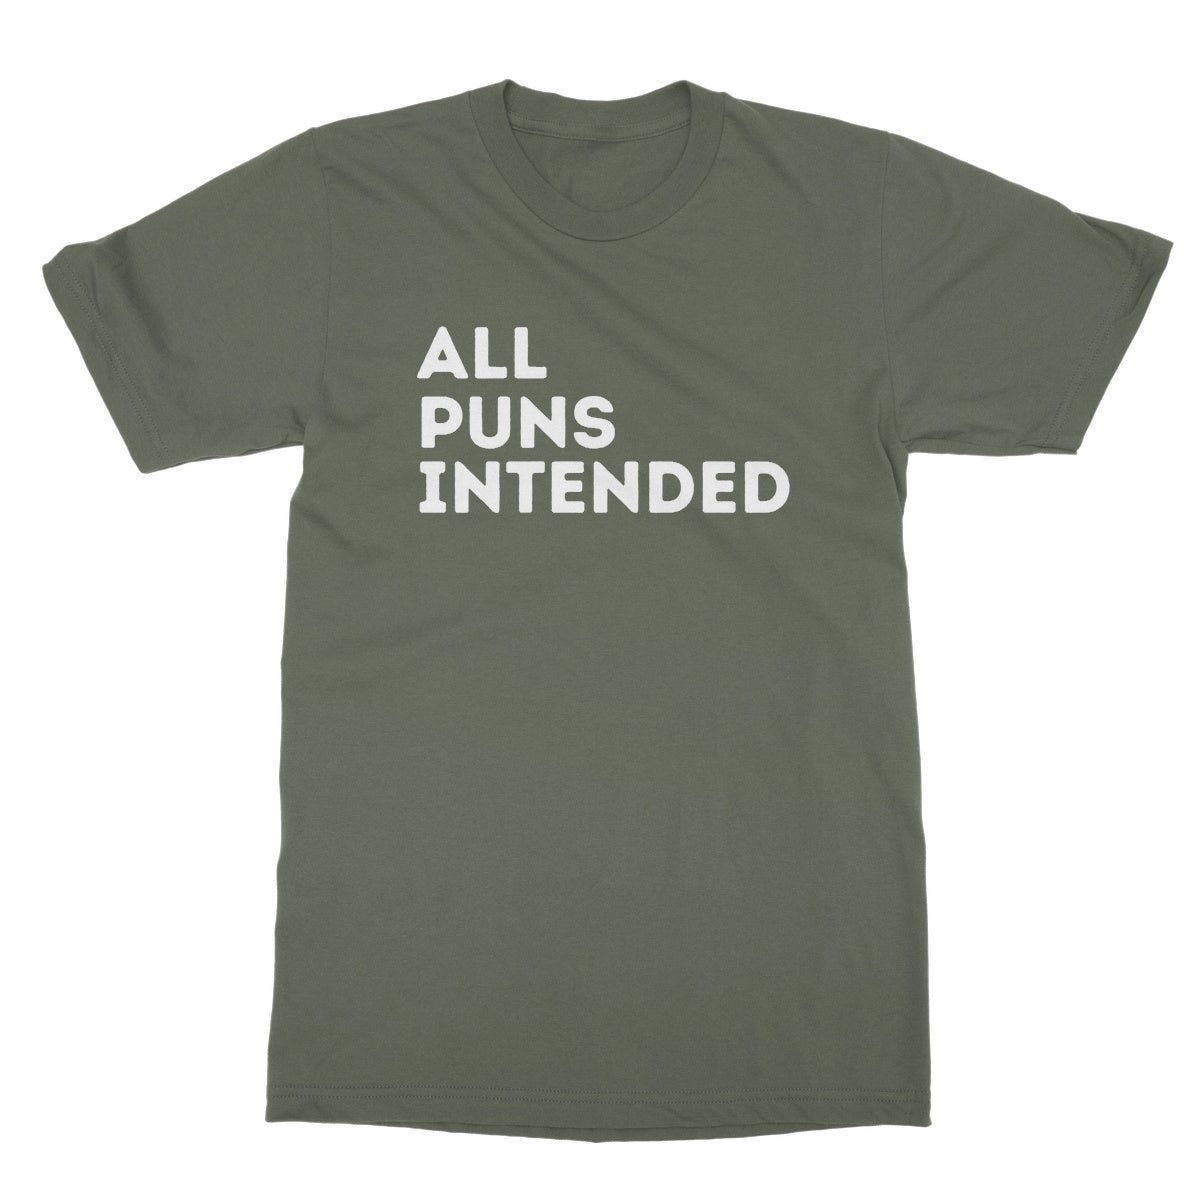 all puns intended t shirt green